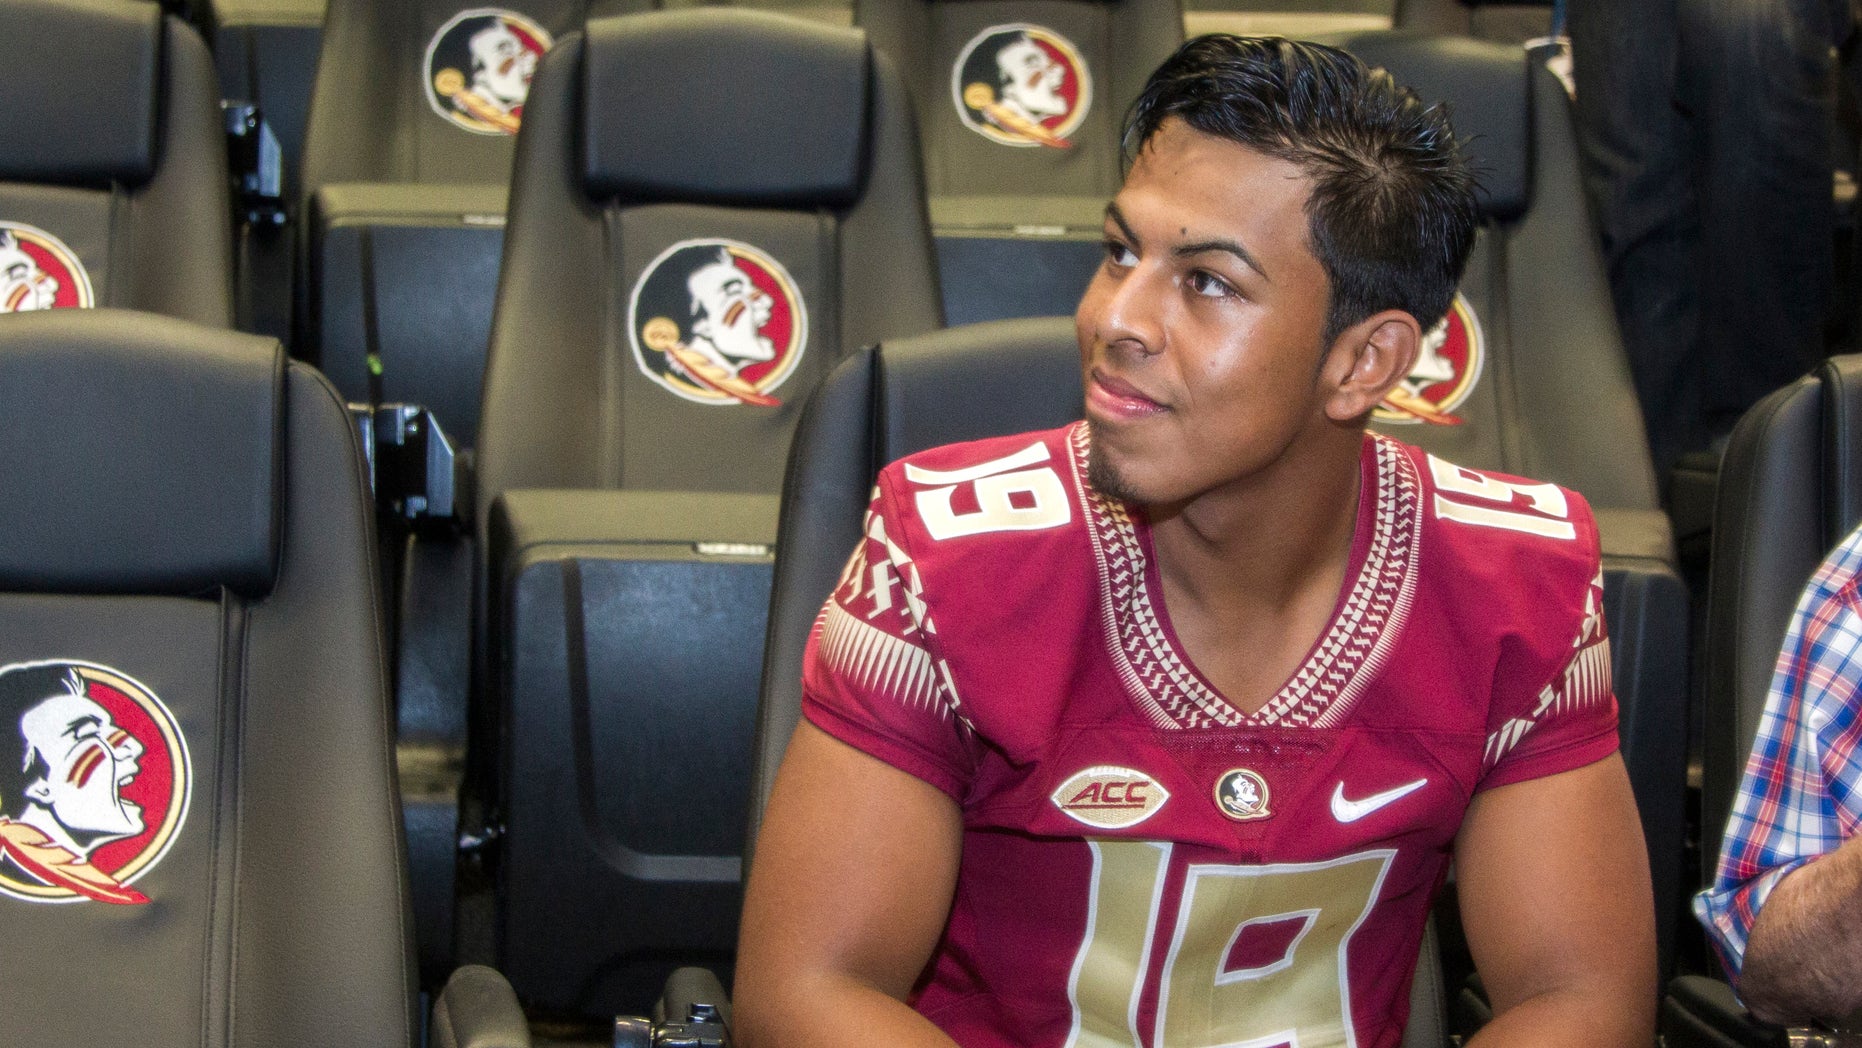 FSU's Roberto Aguayo on pace to best kicker in bigtime college